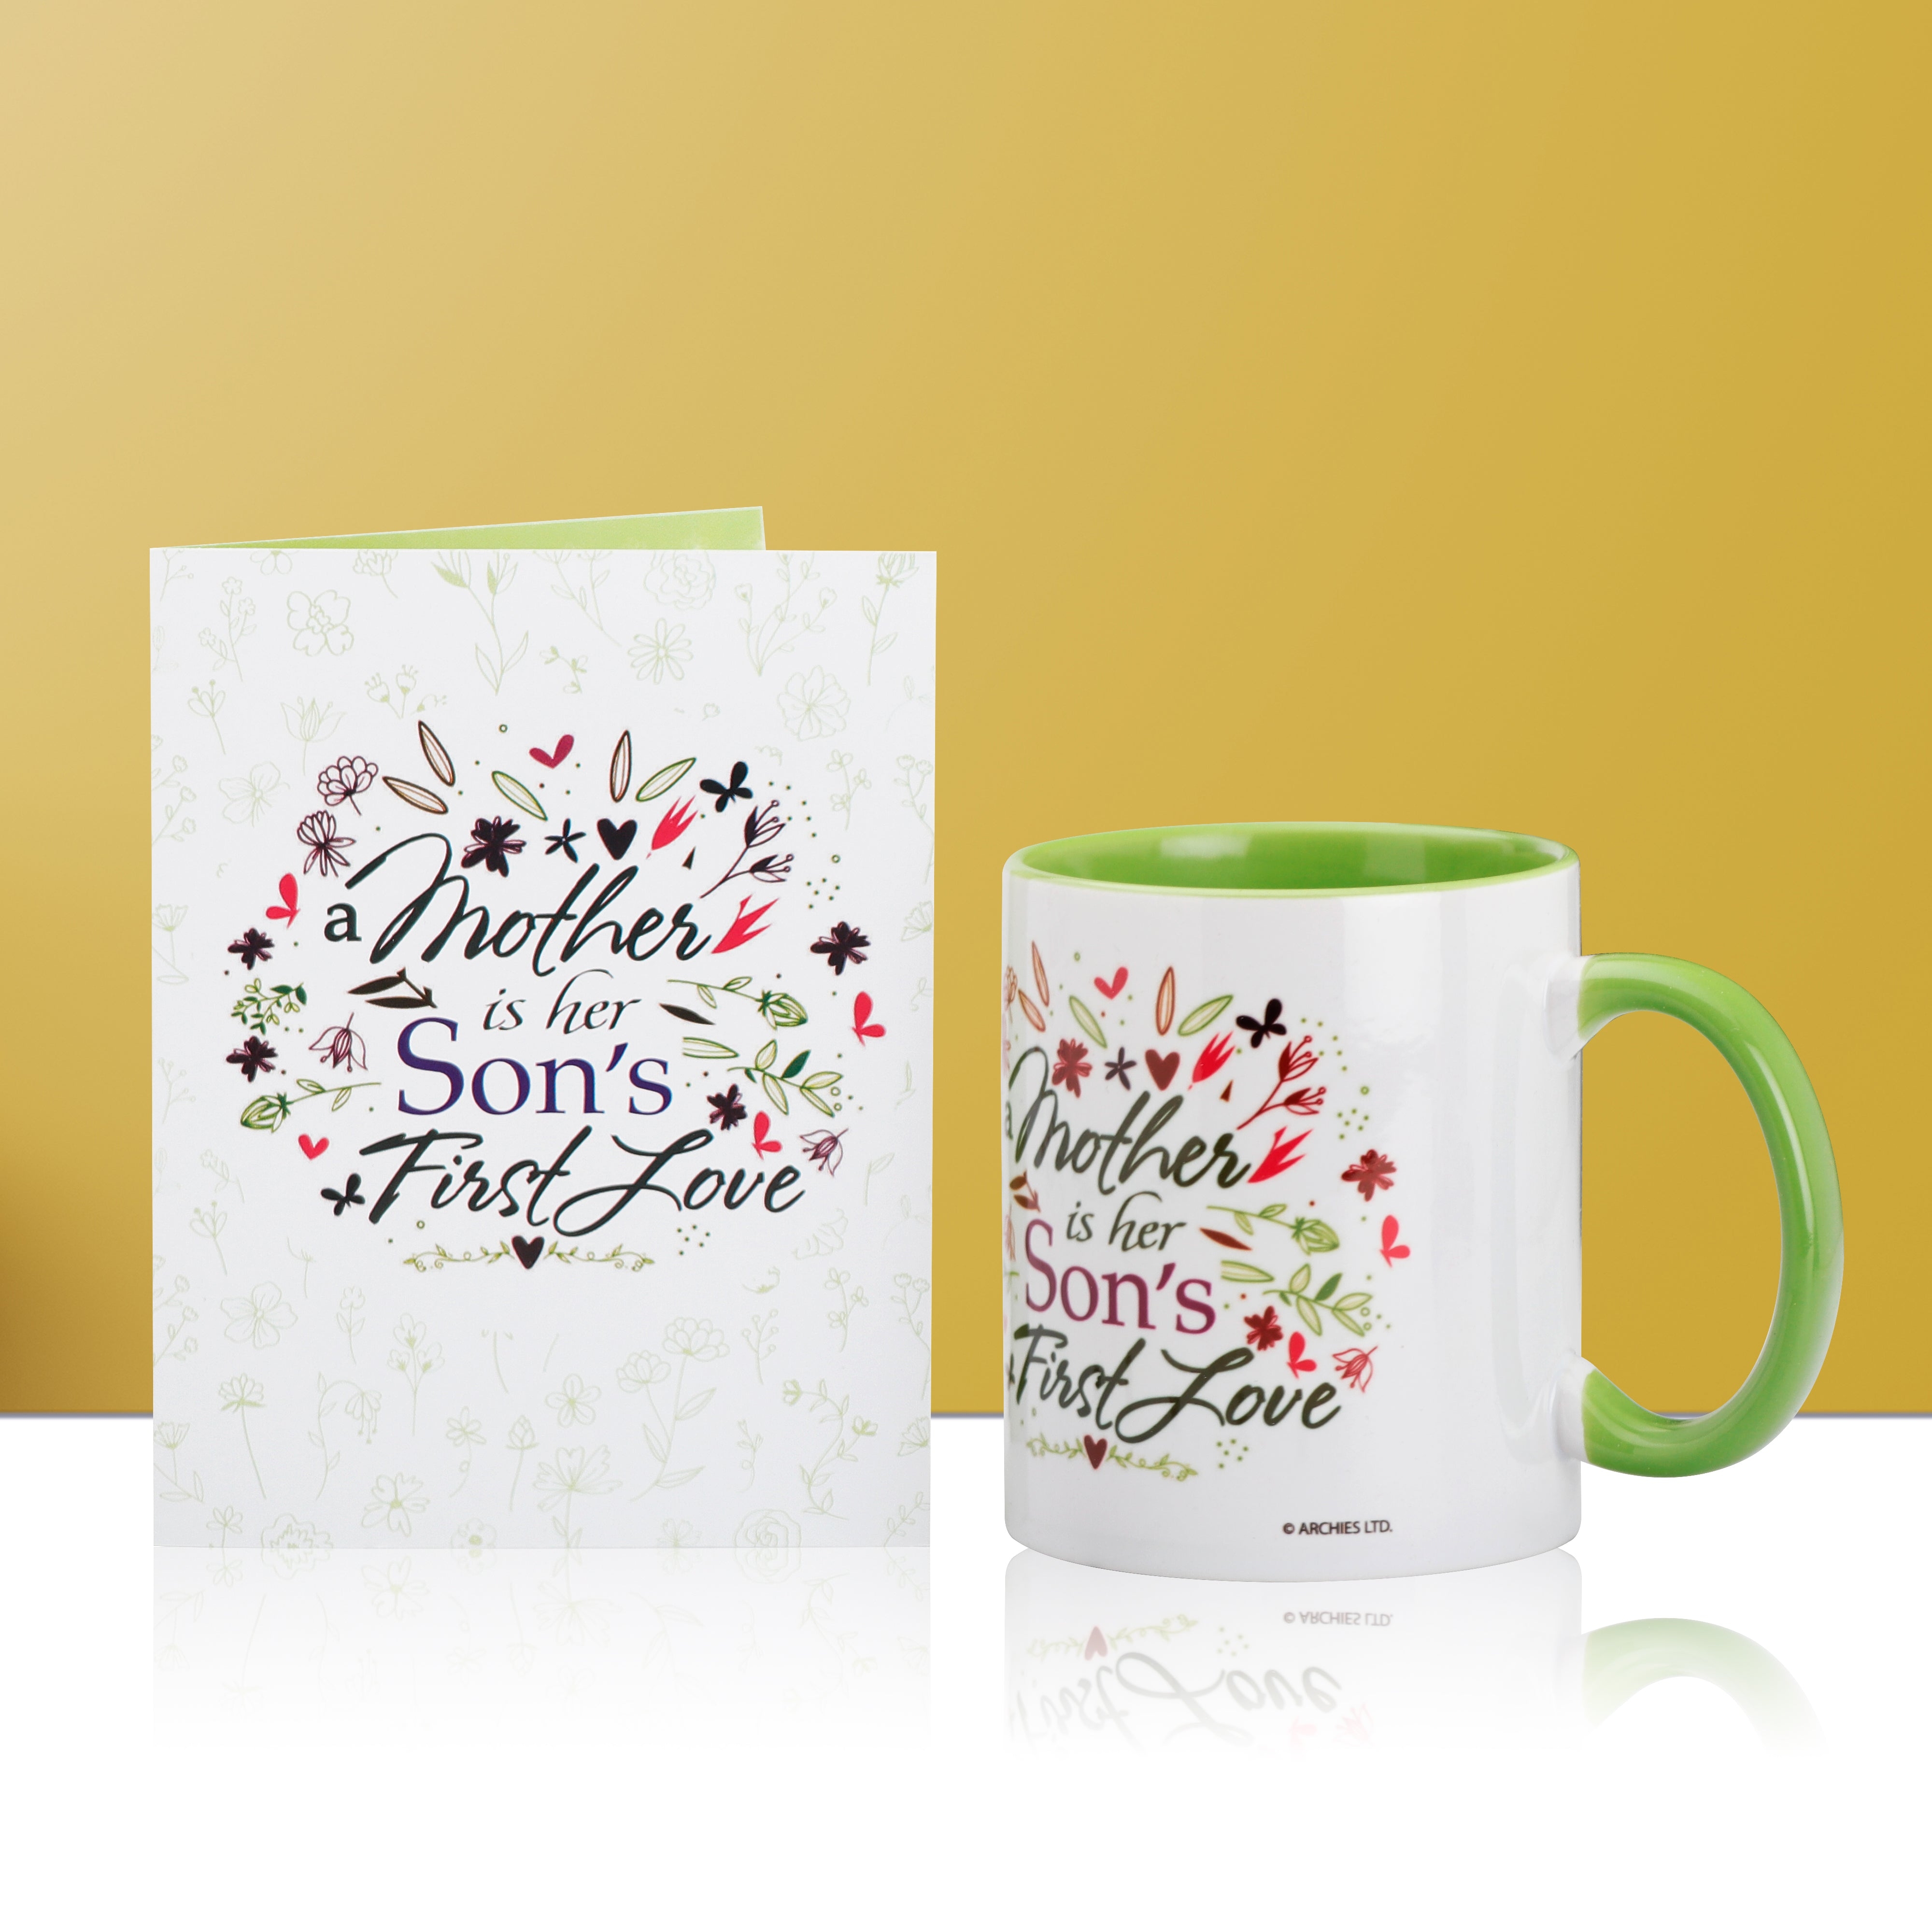 Archies ceremic "Mother is her Son first Love" Cofee mug with mini greeting card for gifting